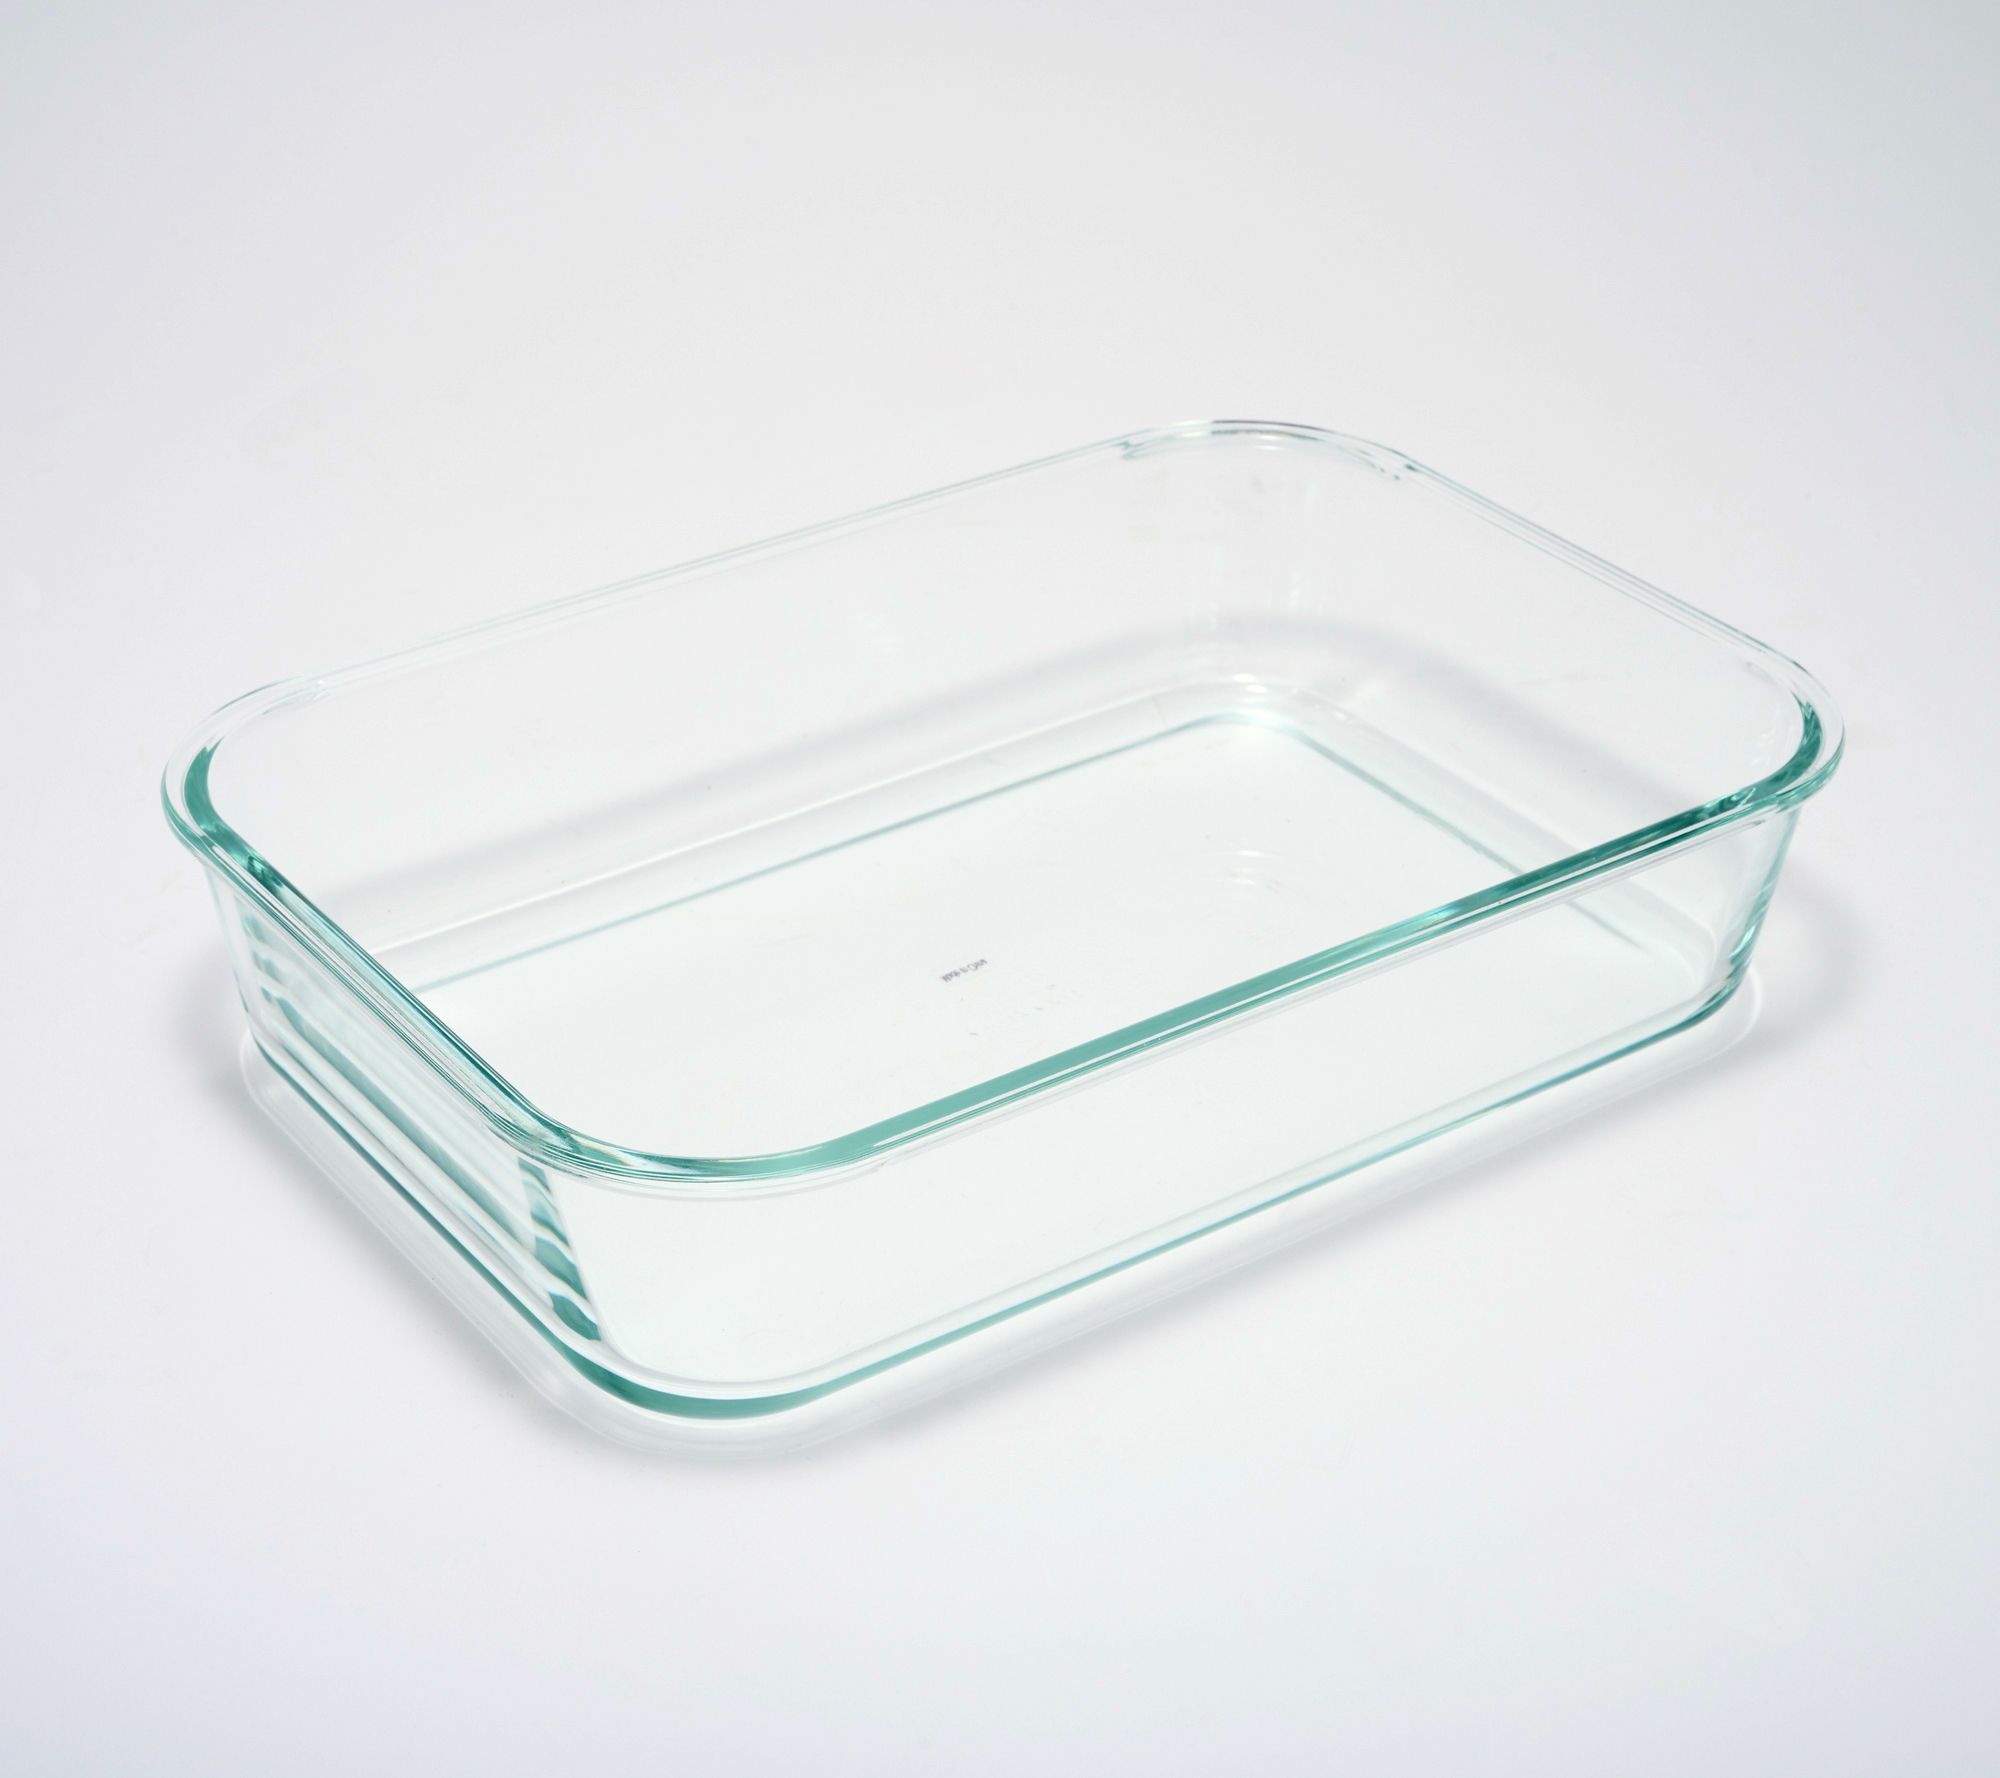 NEW* Amazing Locking Lids for Cookie Sheets, Blog